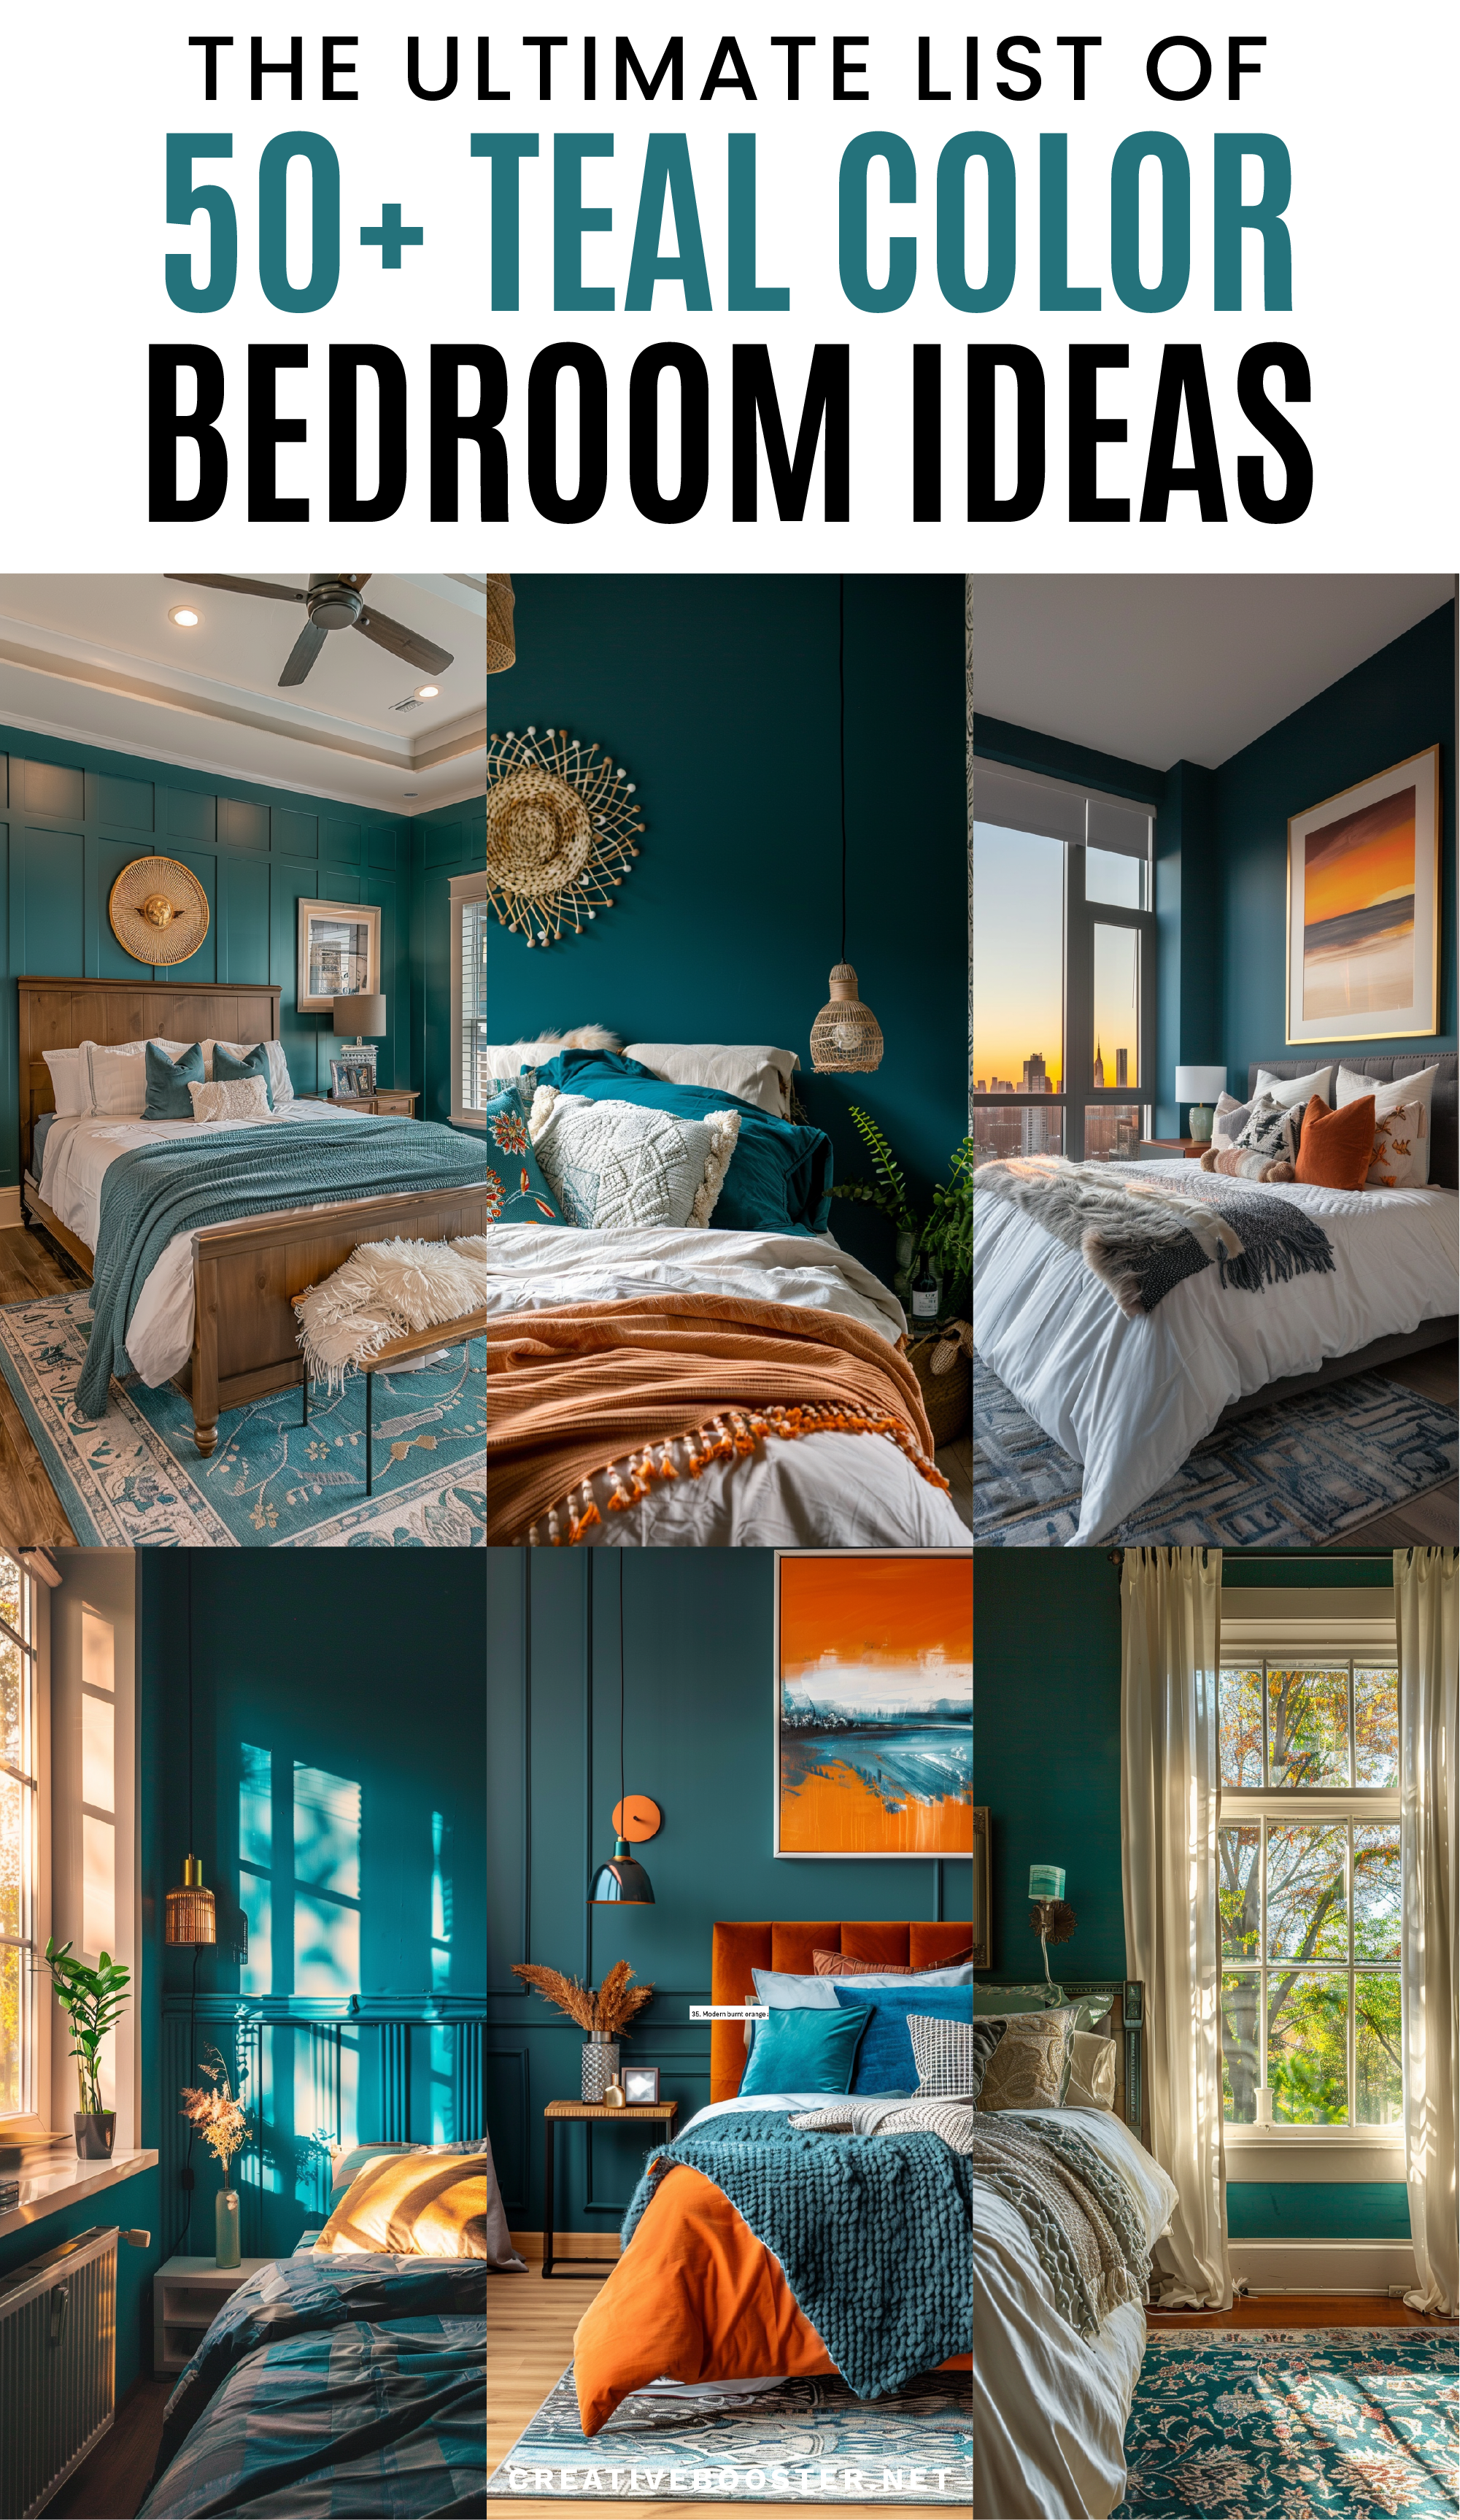 Teal-Bedroom-Ideas-(Home-Decoration-and-Design-Inspiration) Tall